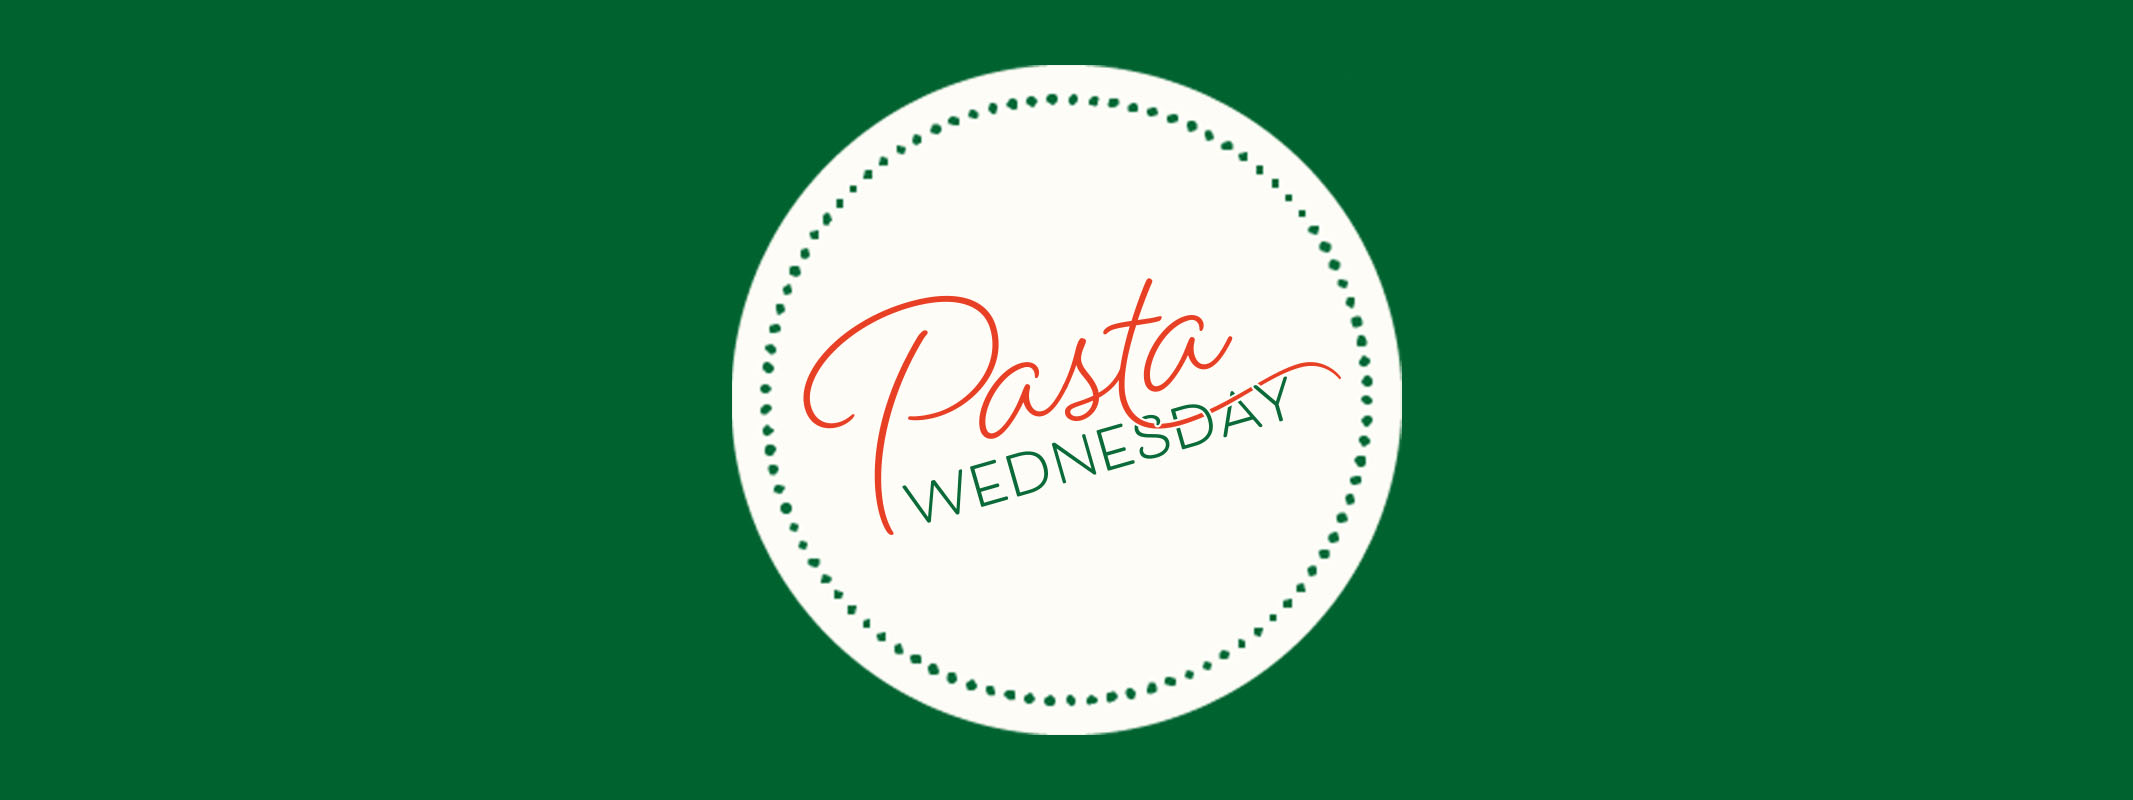 Pasta Wednesday logo superimposed over a green background 